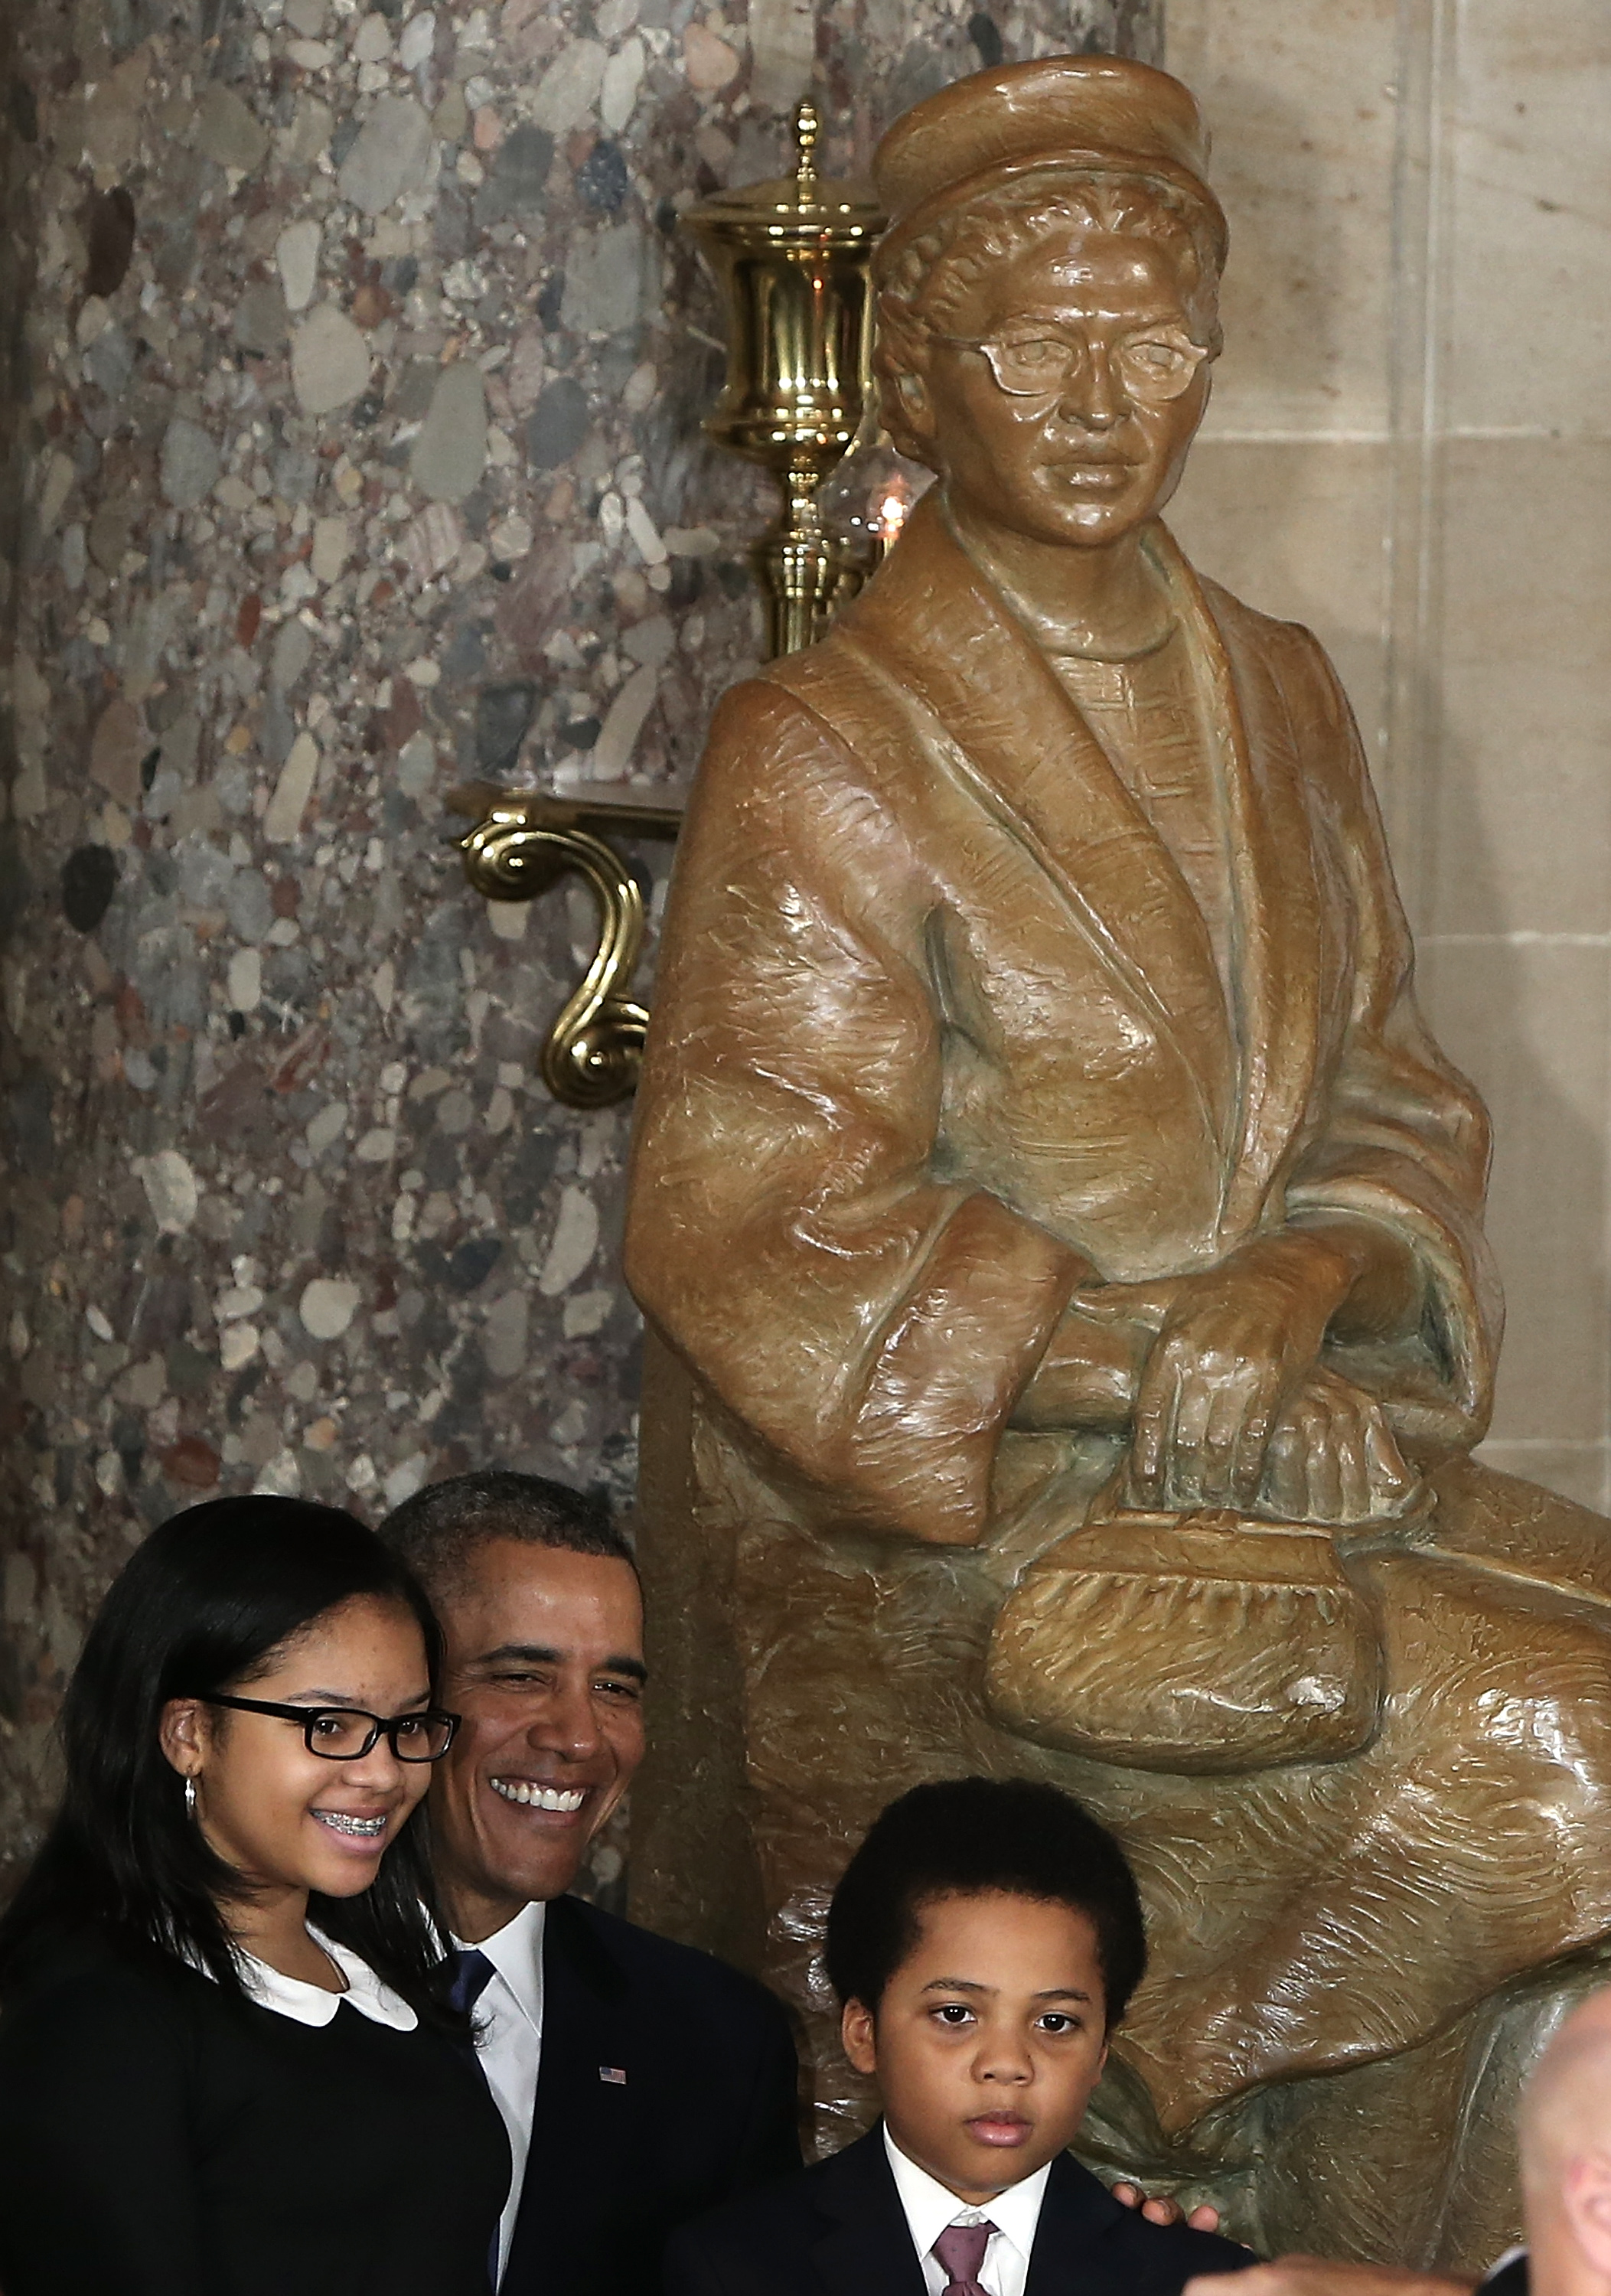 President Barack Obama (C) poses with guests following a ceremony to unveil a statue honoring the late civil rights activist Rosa Parks in Statutory Hall of the U.S. Capitol February 27, 2013 in Washington, DC. . (credit: Win McNamee/Getty Images)